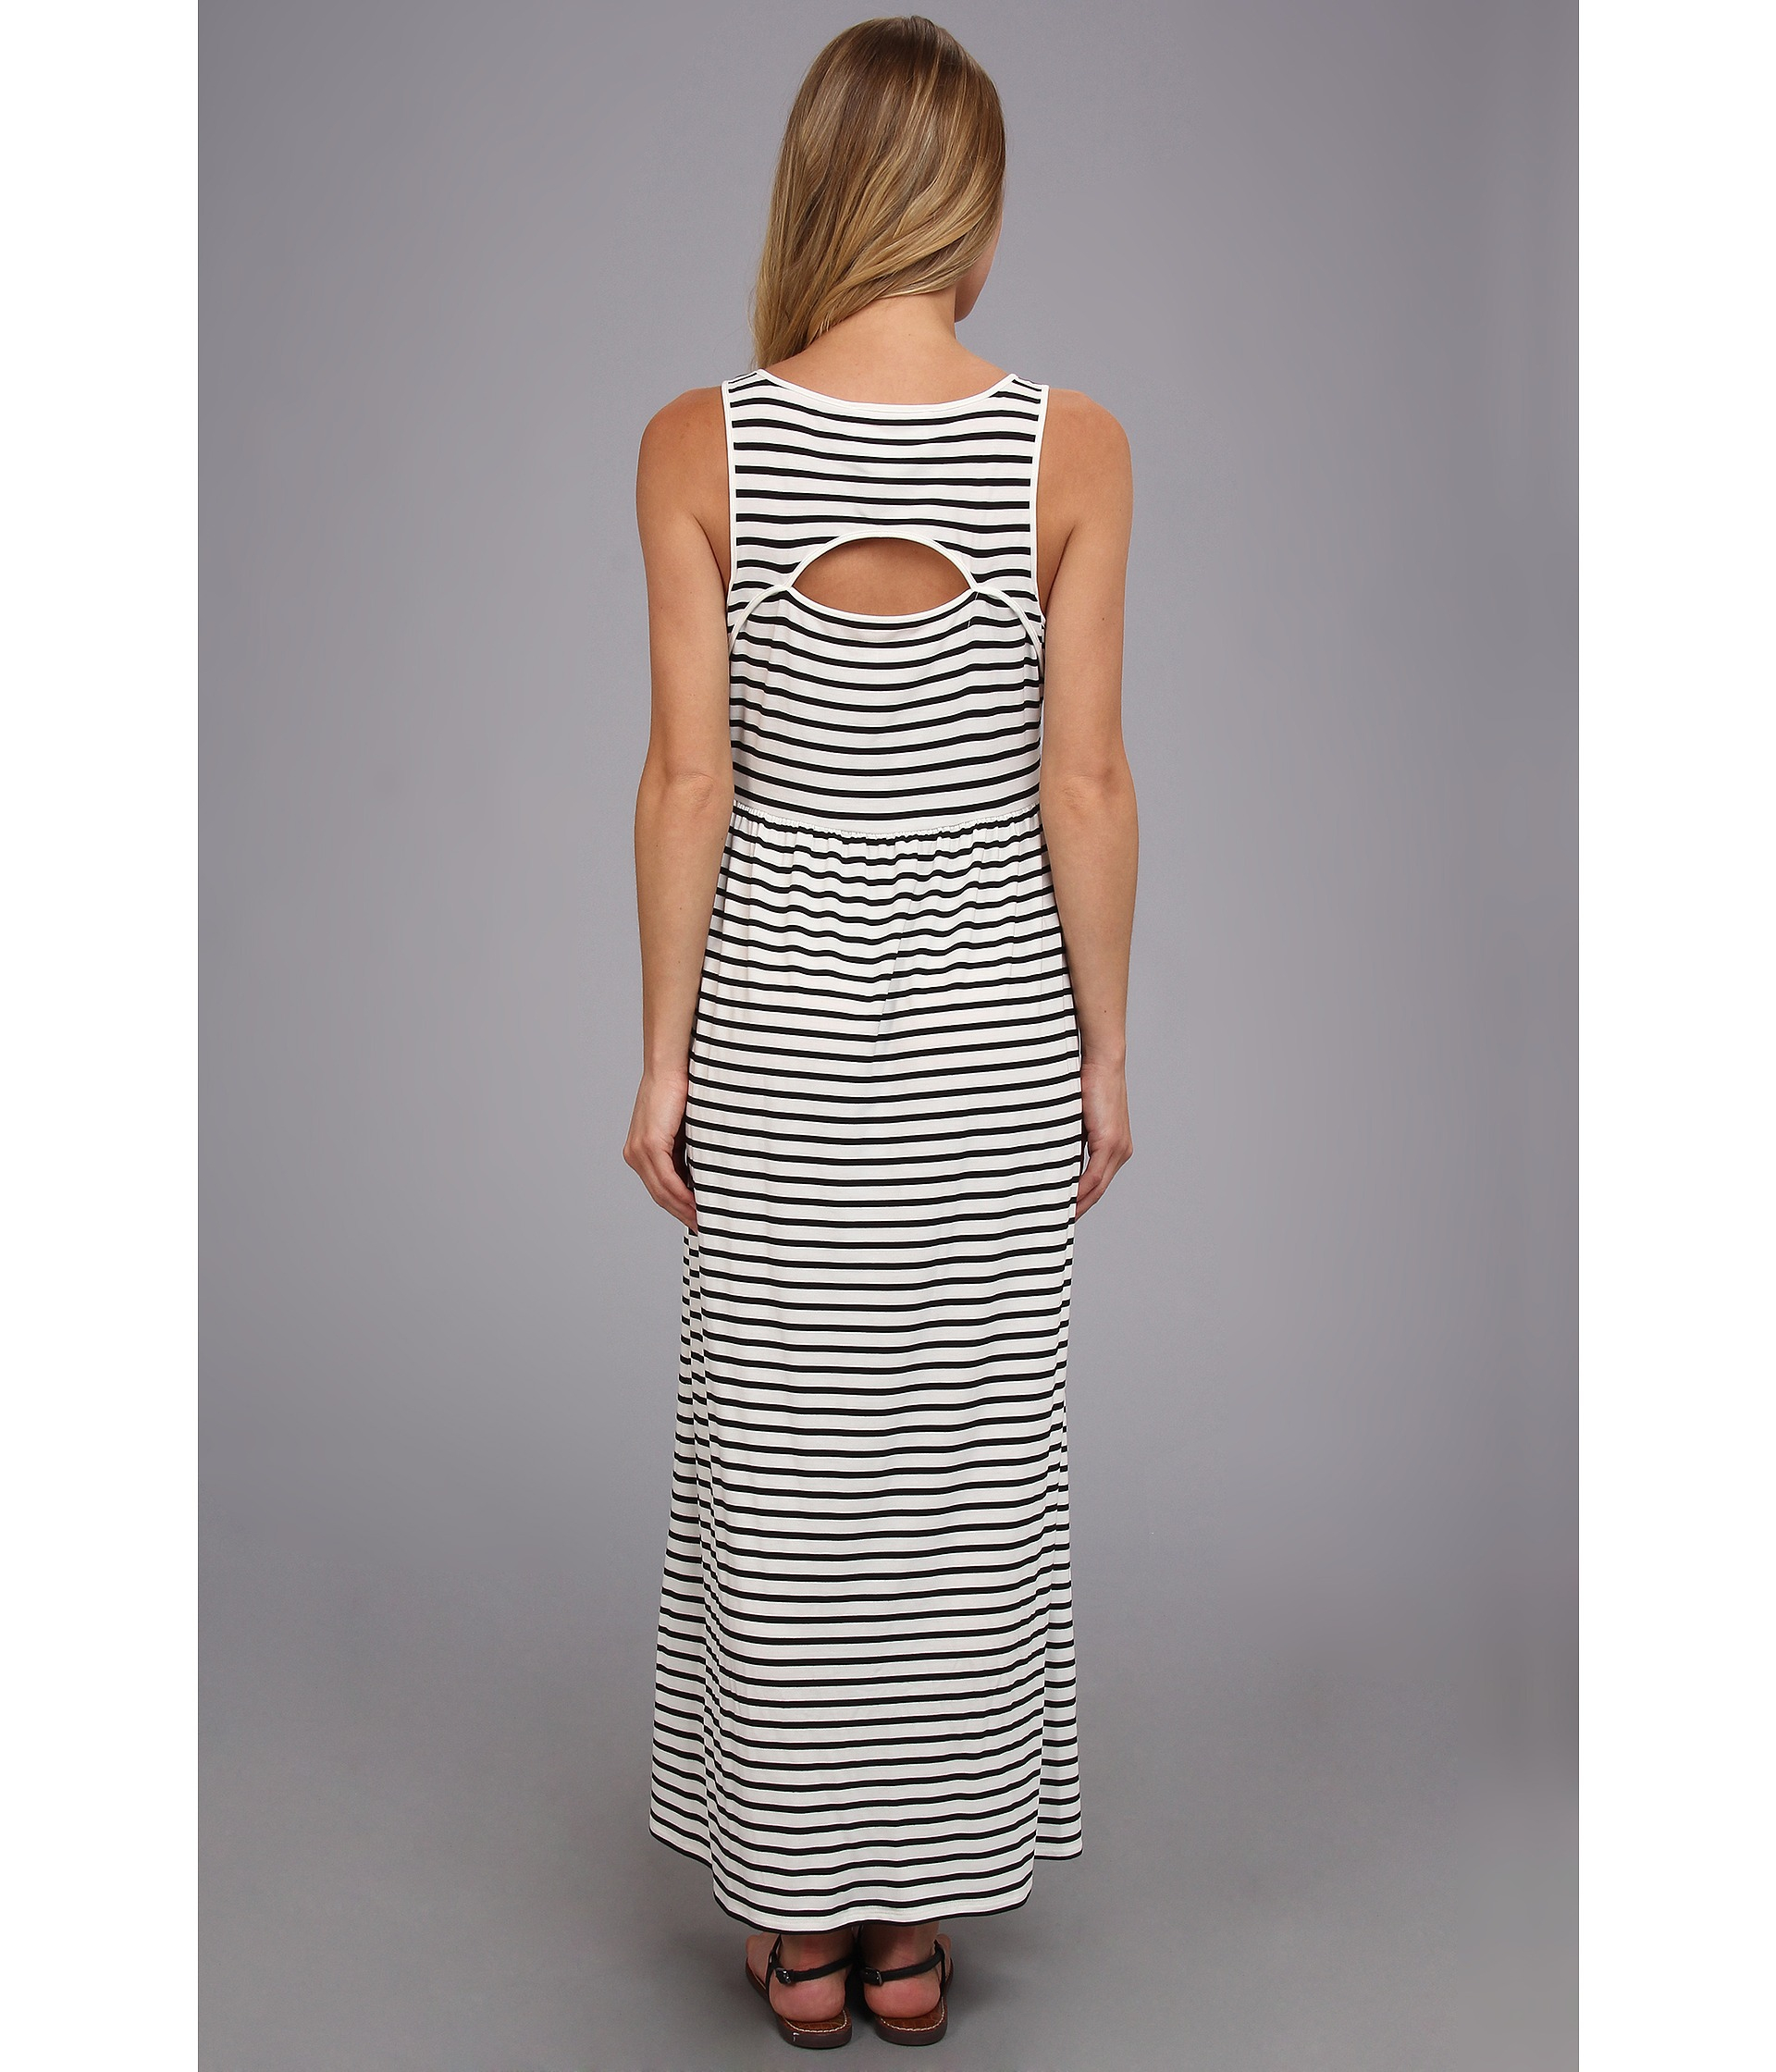 Lyst - Two By Vince Camuto Sl Rising Stripe Maxi Dress in Black